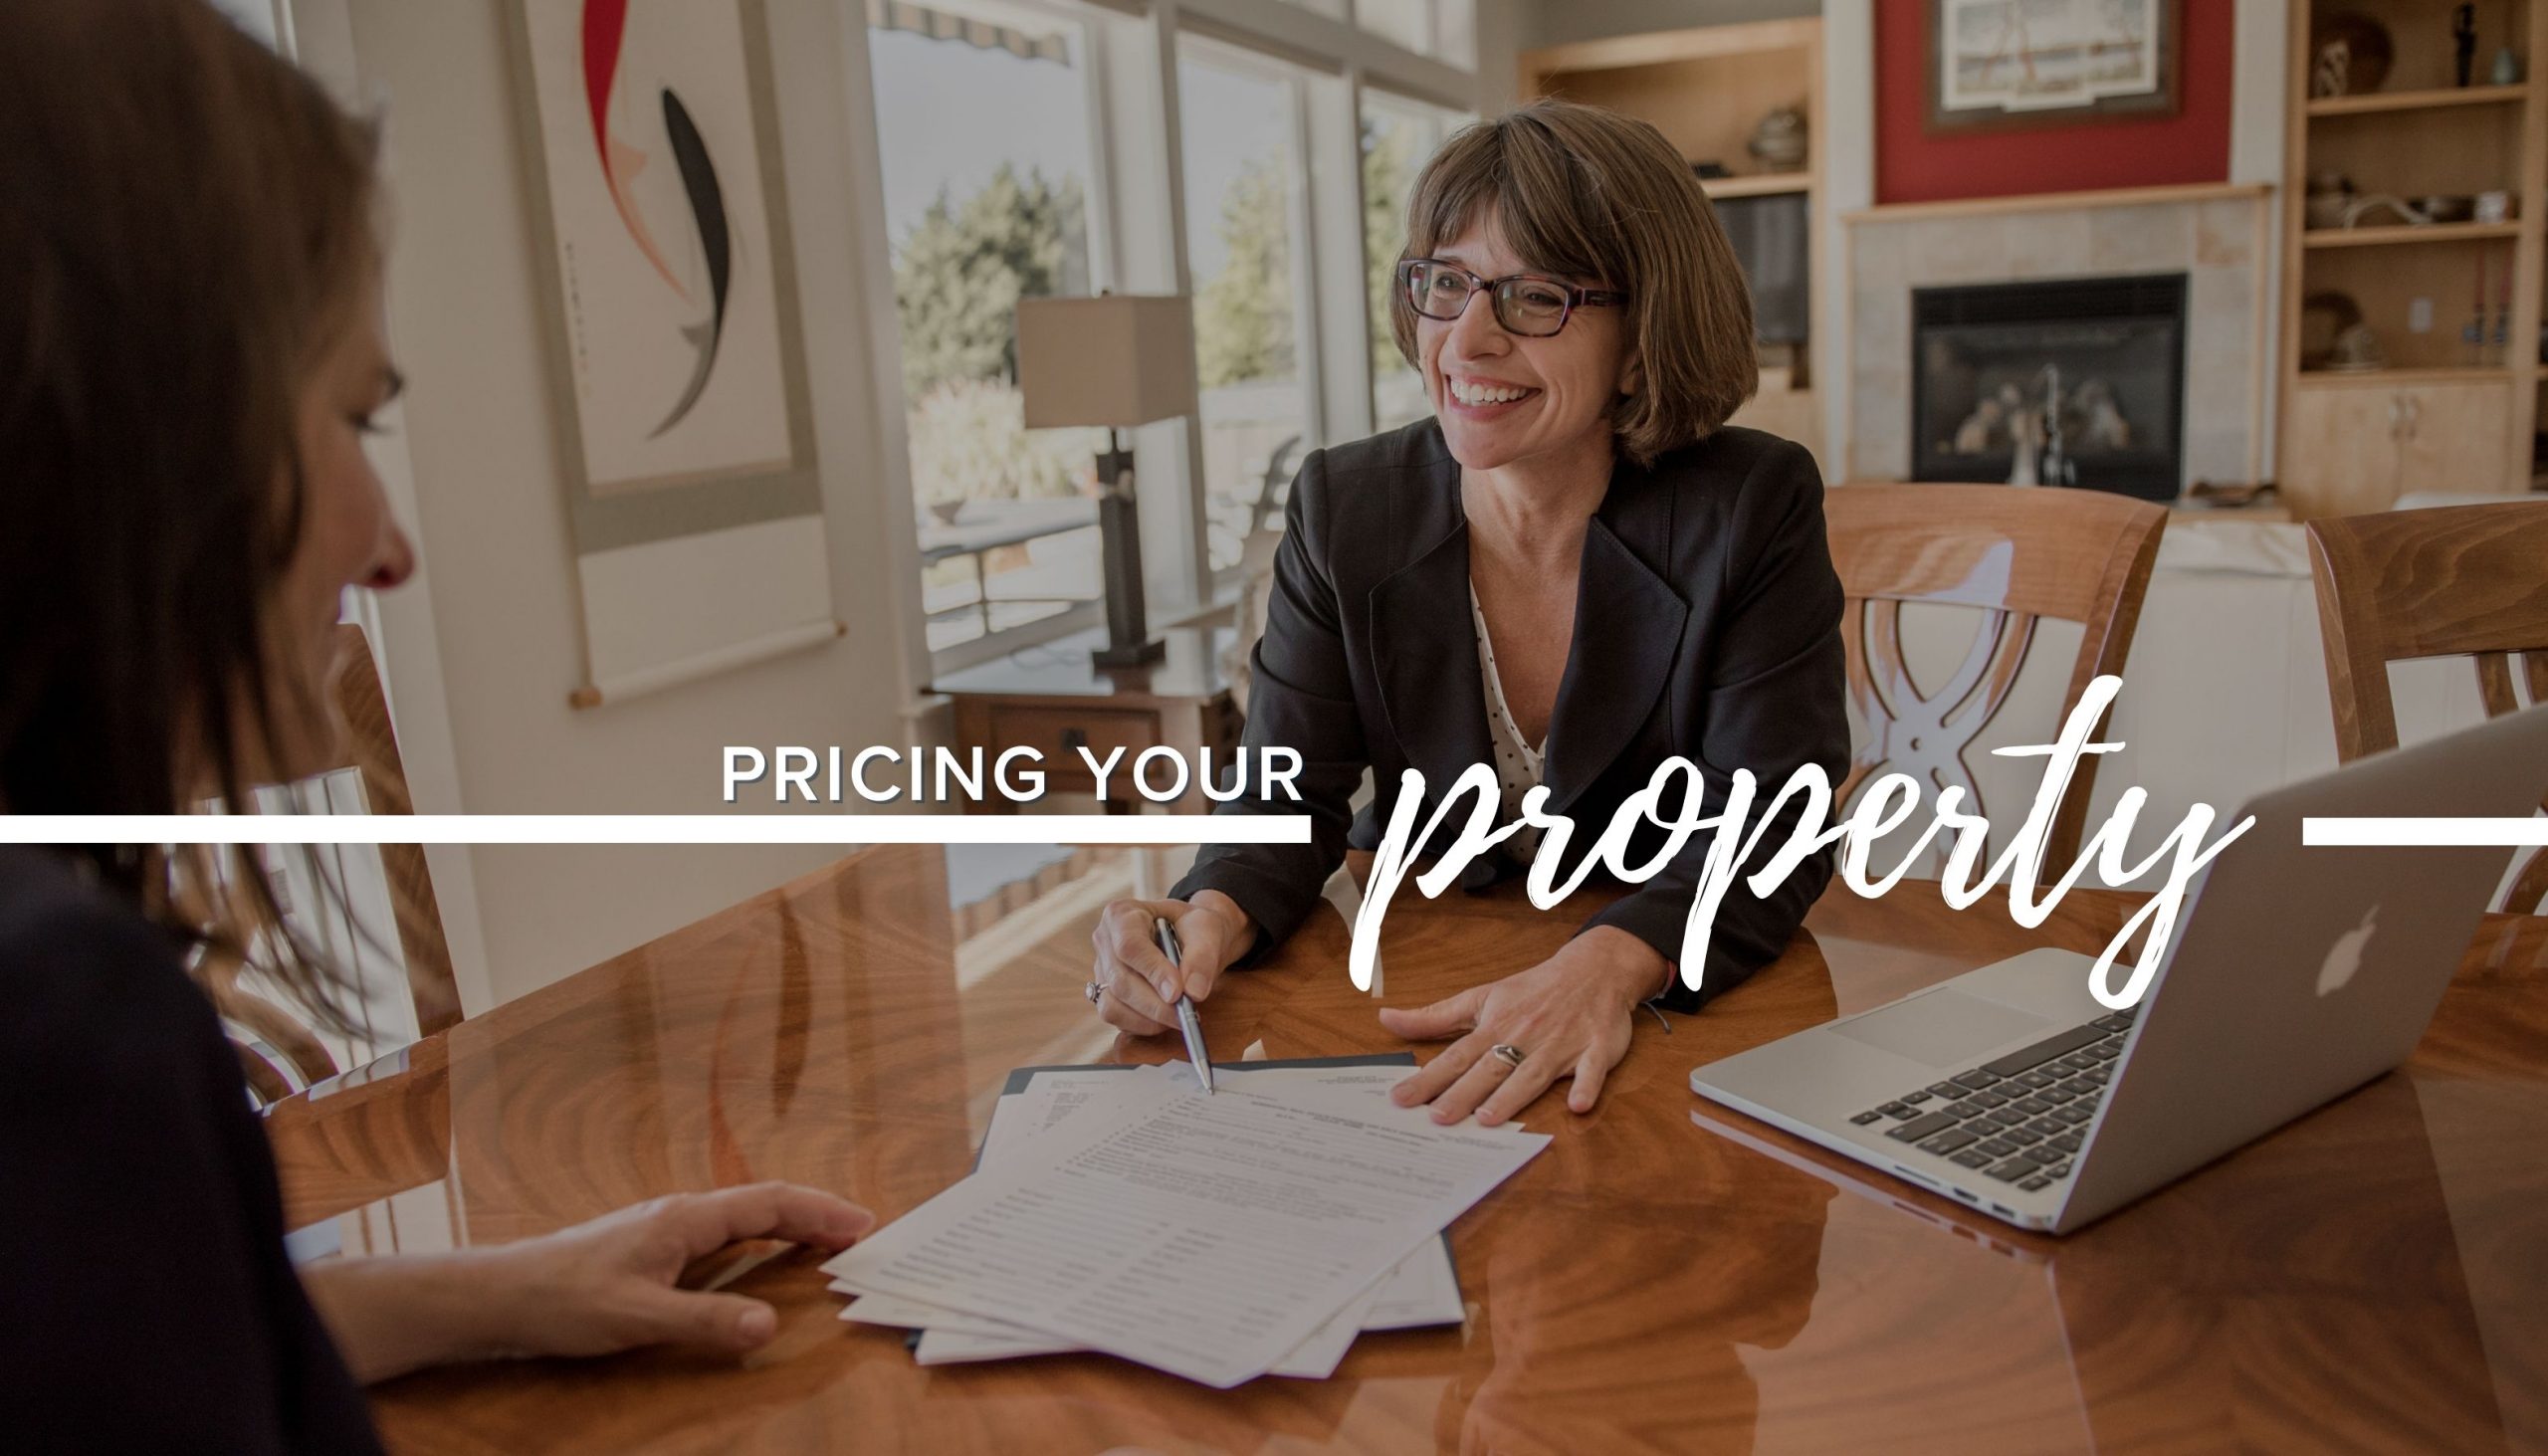 Sellers, Pricing your property